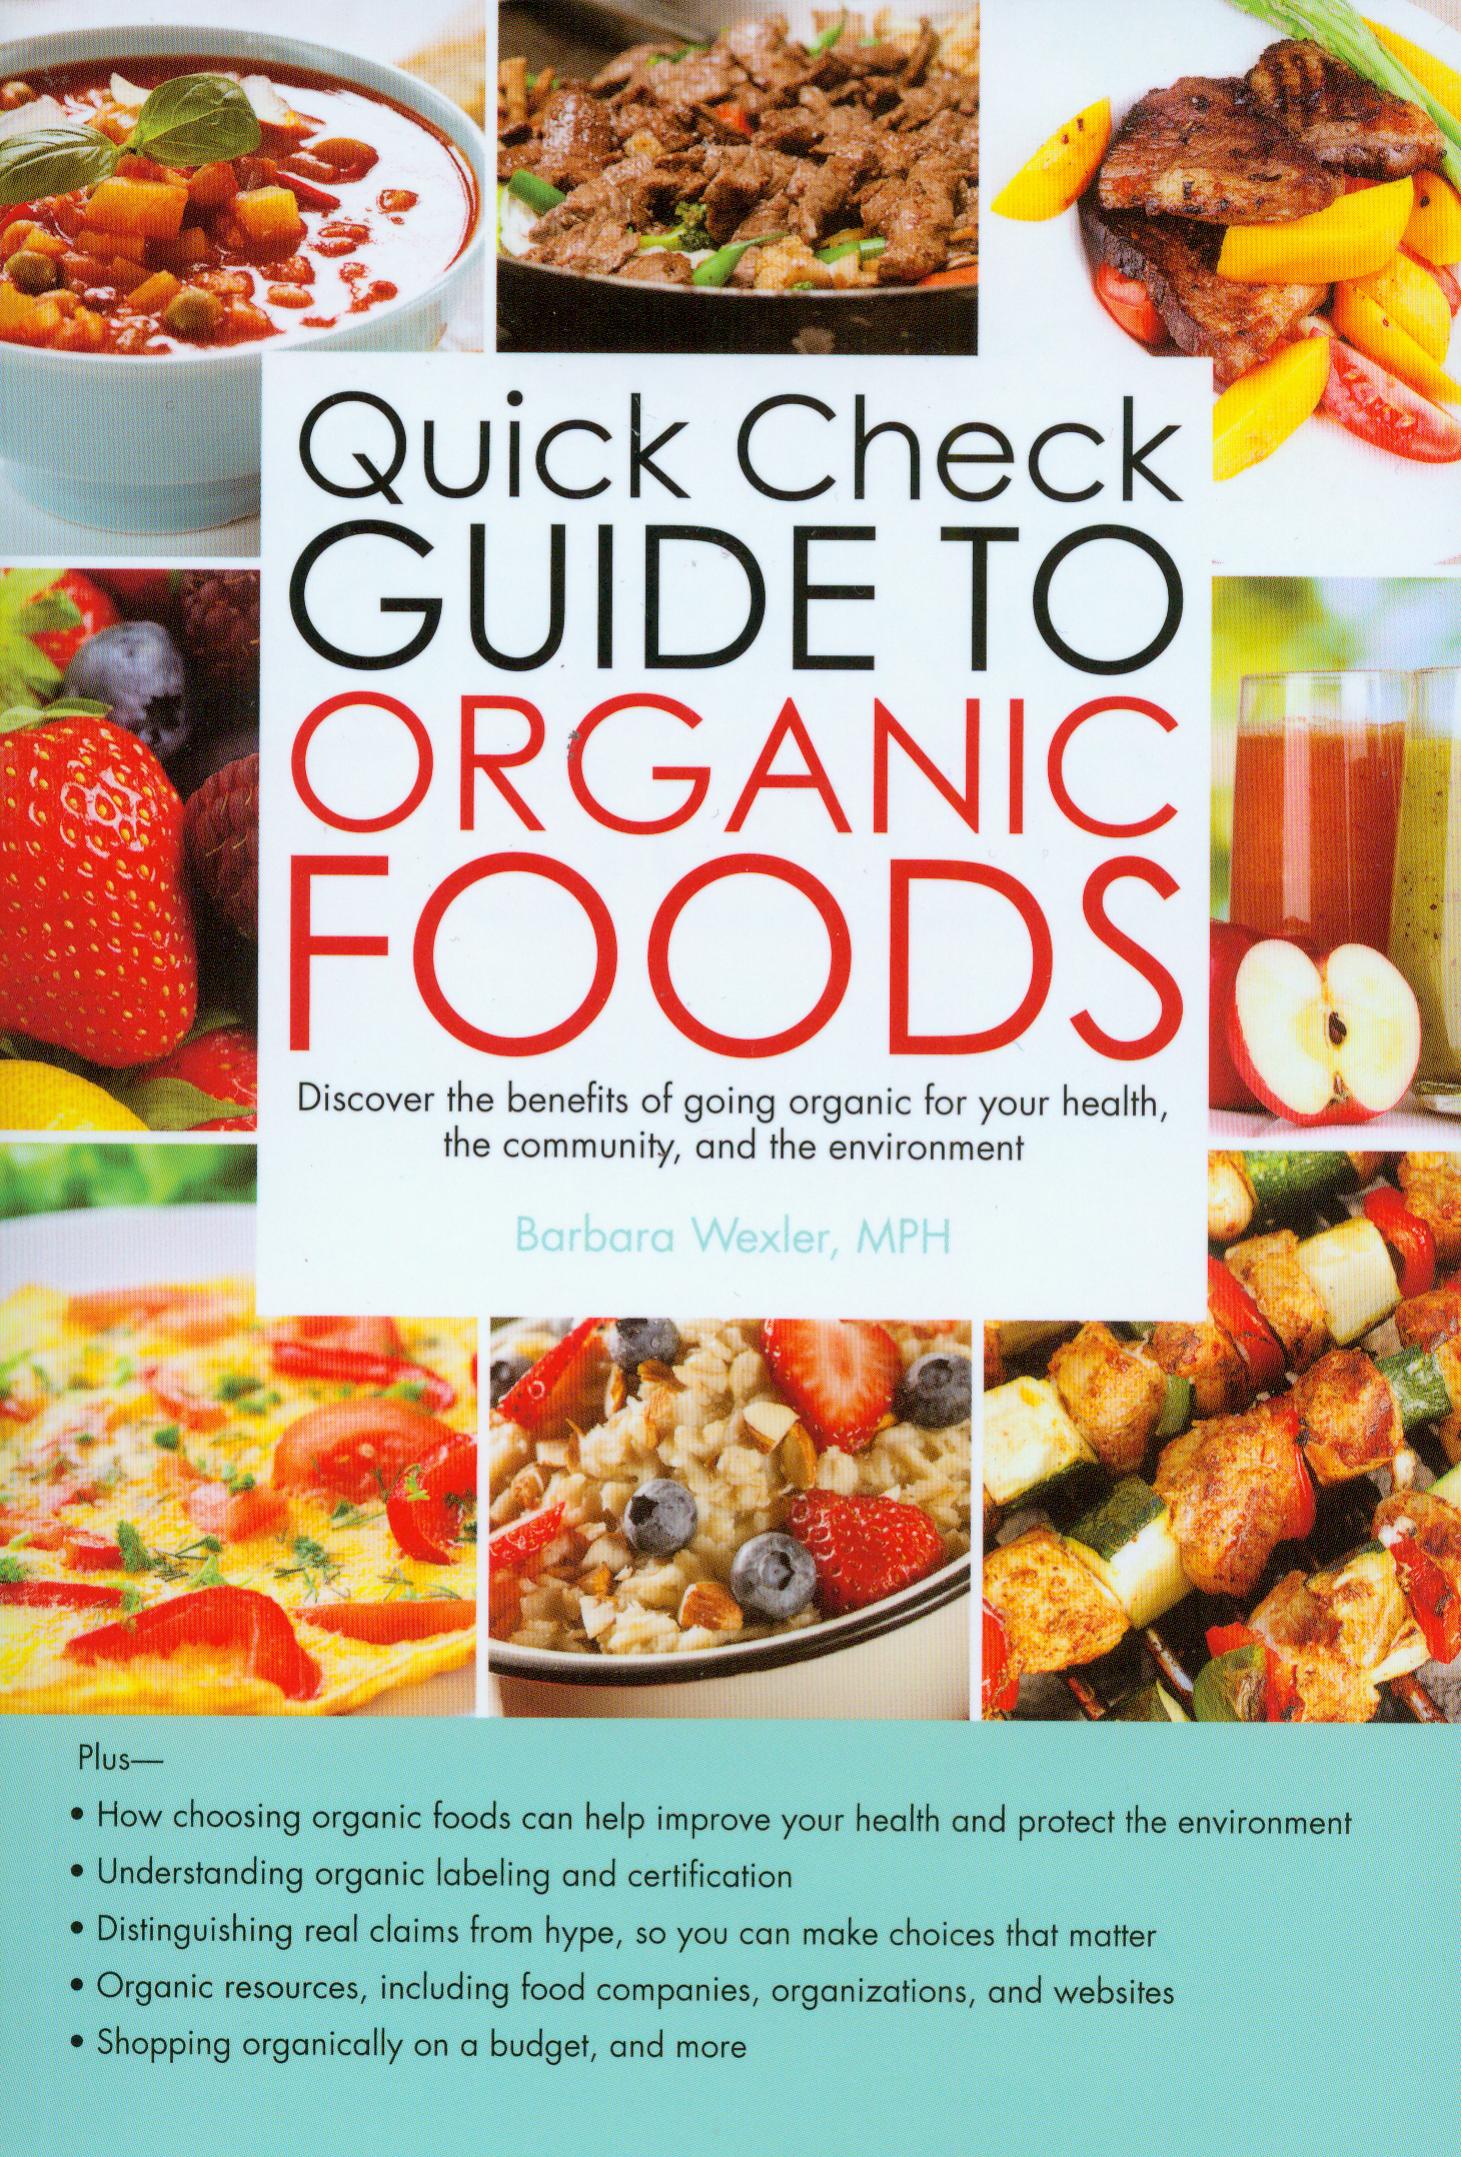 Quick Check Guide To Organic Foods is an all-purpose guide for the person looking to learn about the benefits of organic cooking.